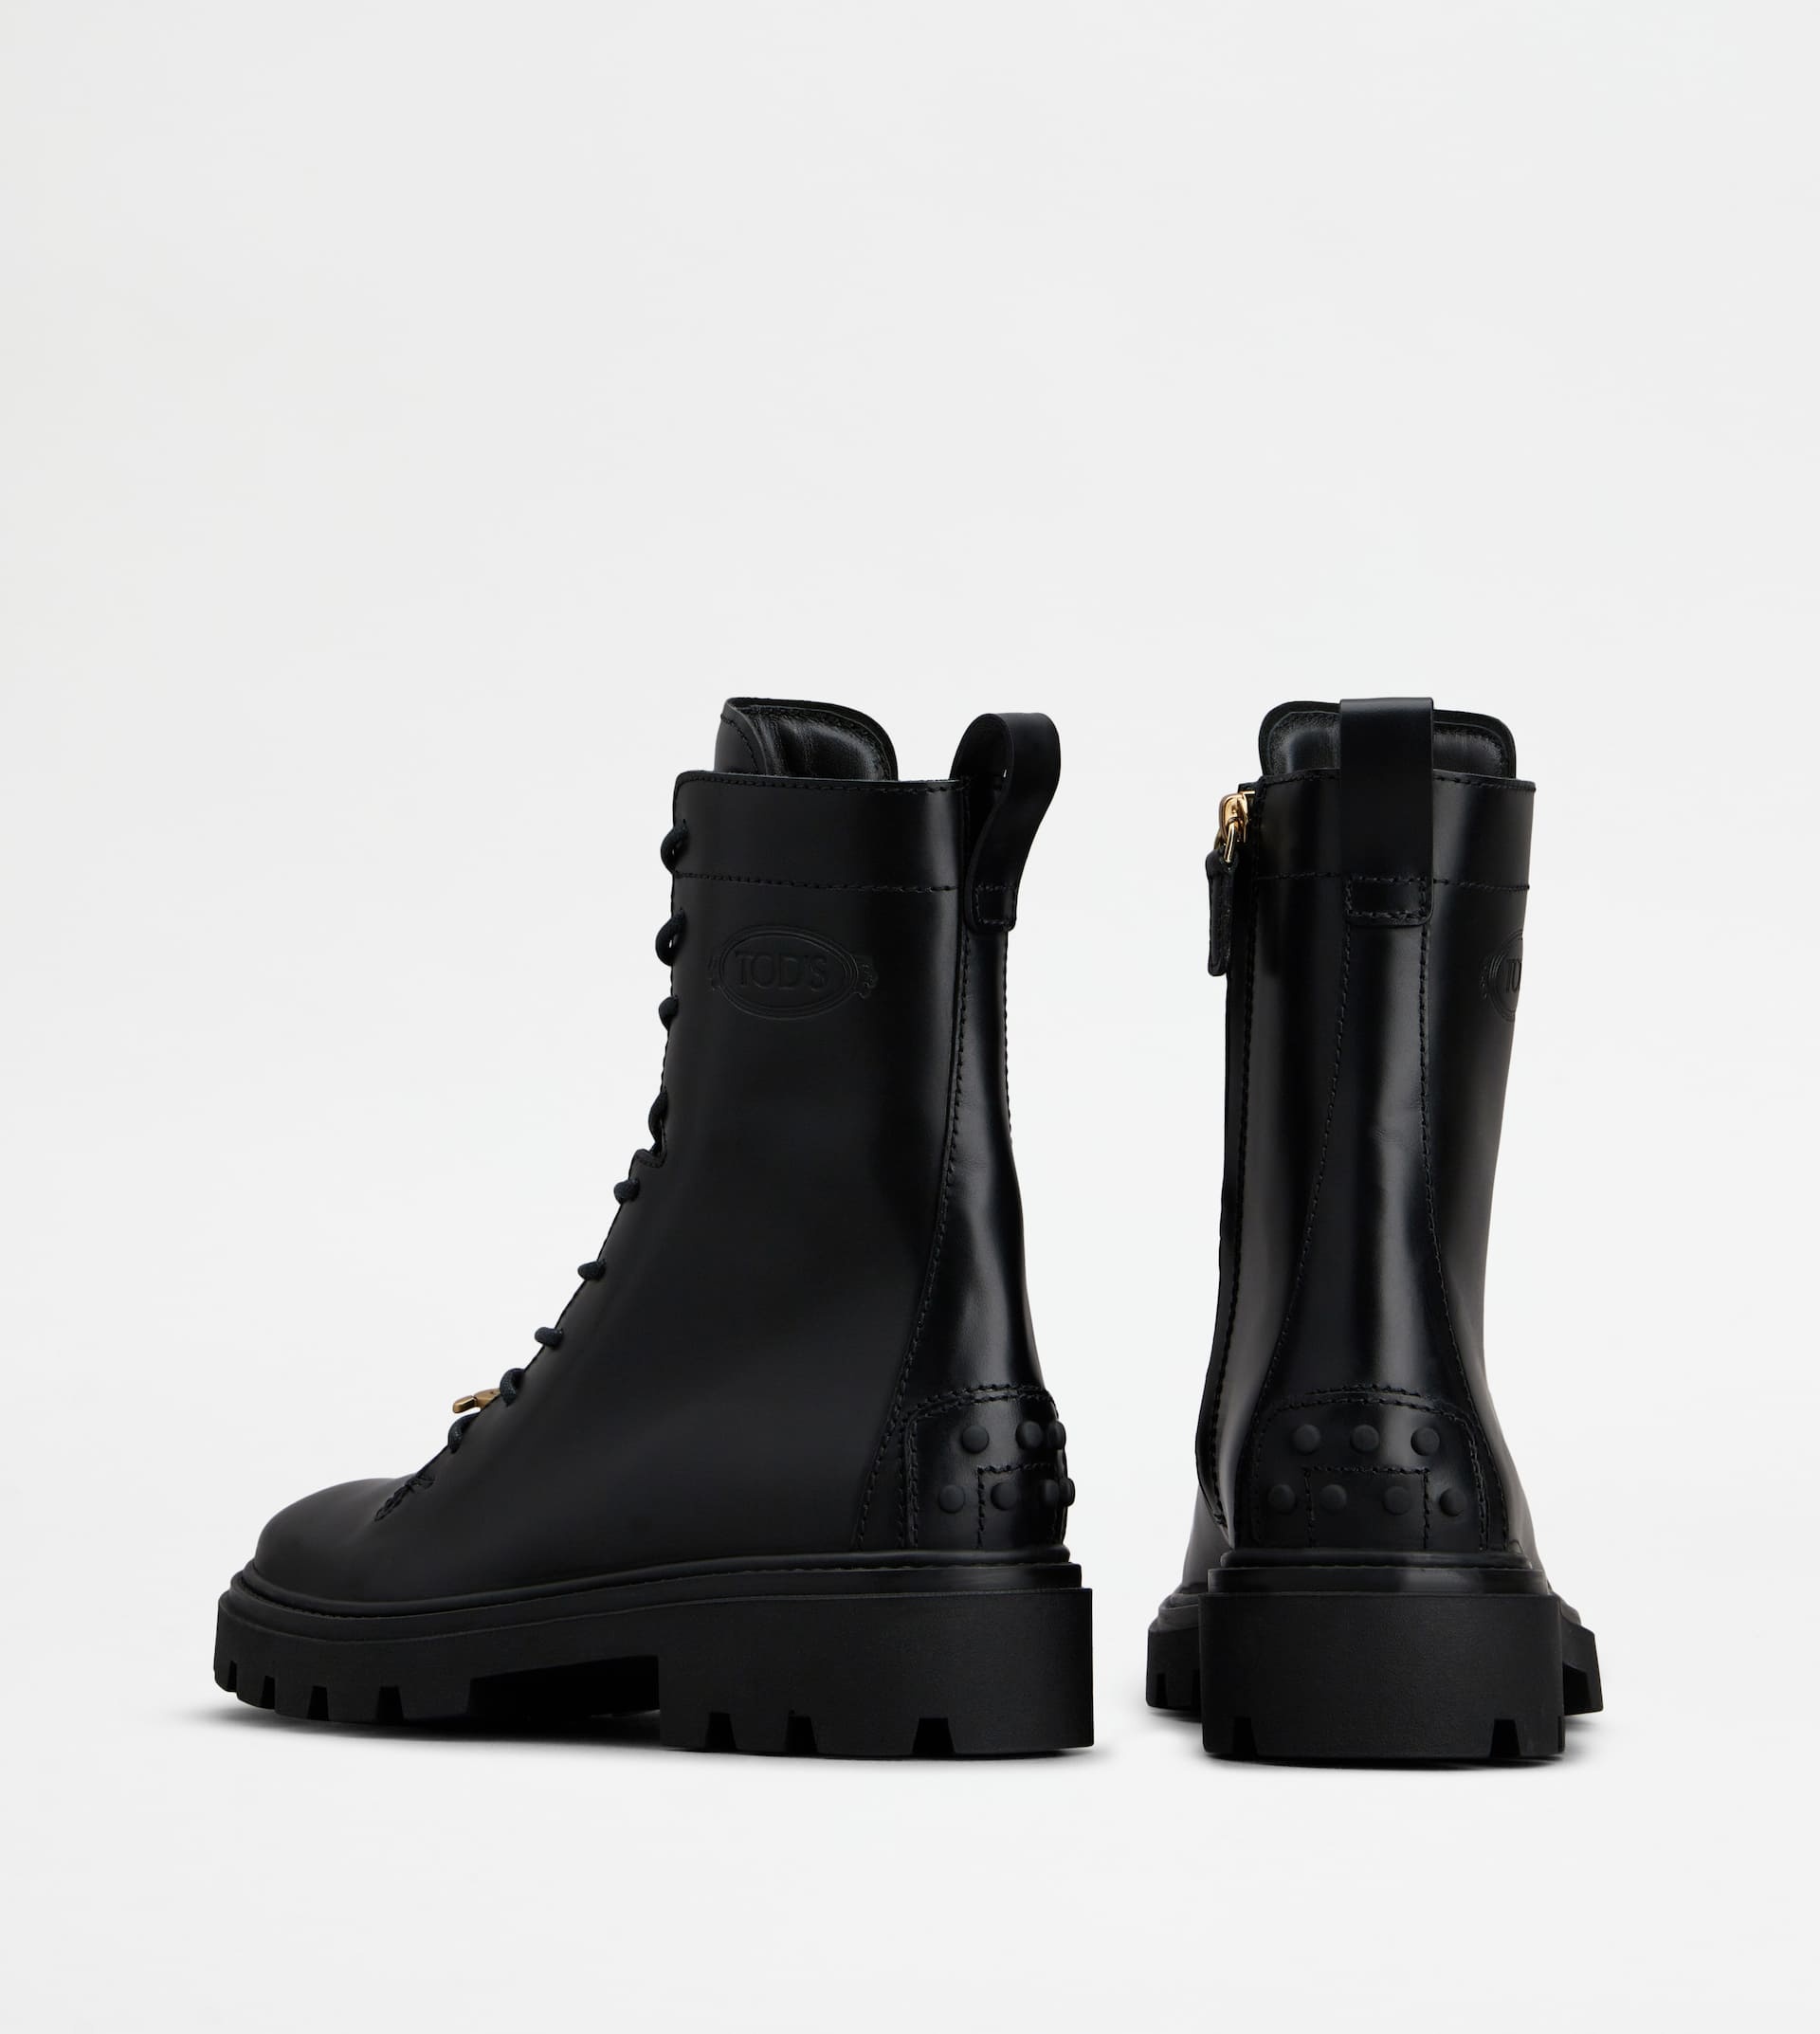 COMBAT BOOTS IN LEATHER - BLACK - 2